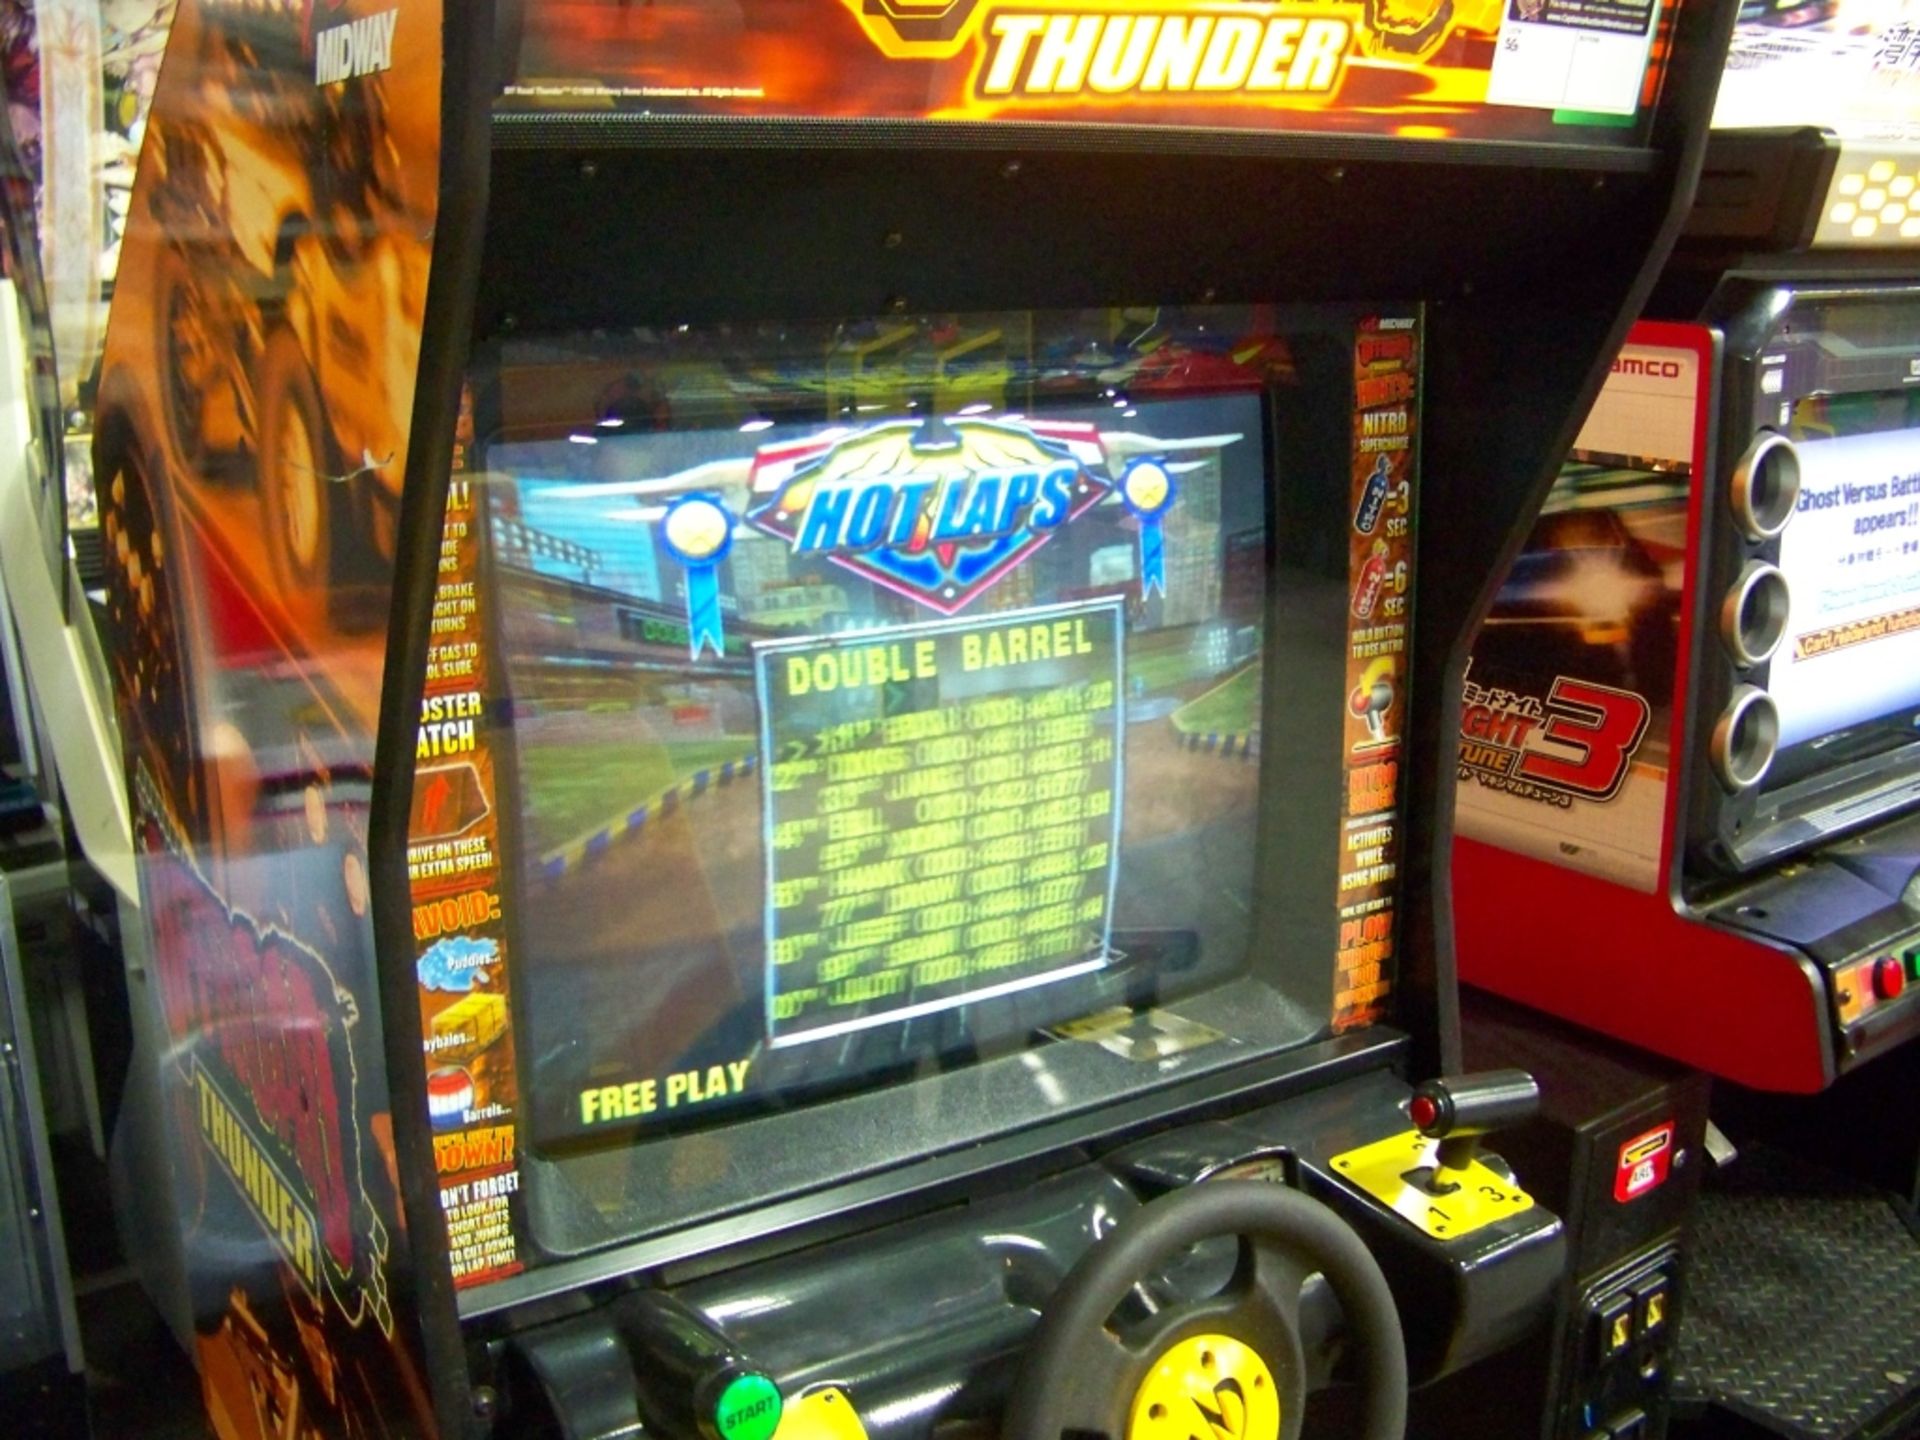 OFFROAD THUNDER MIDWAY RACING ARCADE GAME - Image 7 of 7